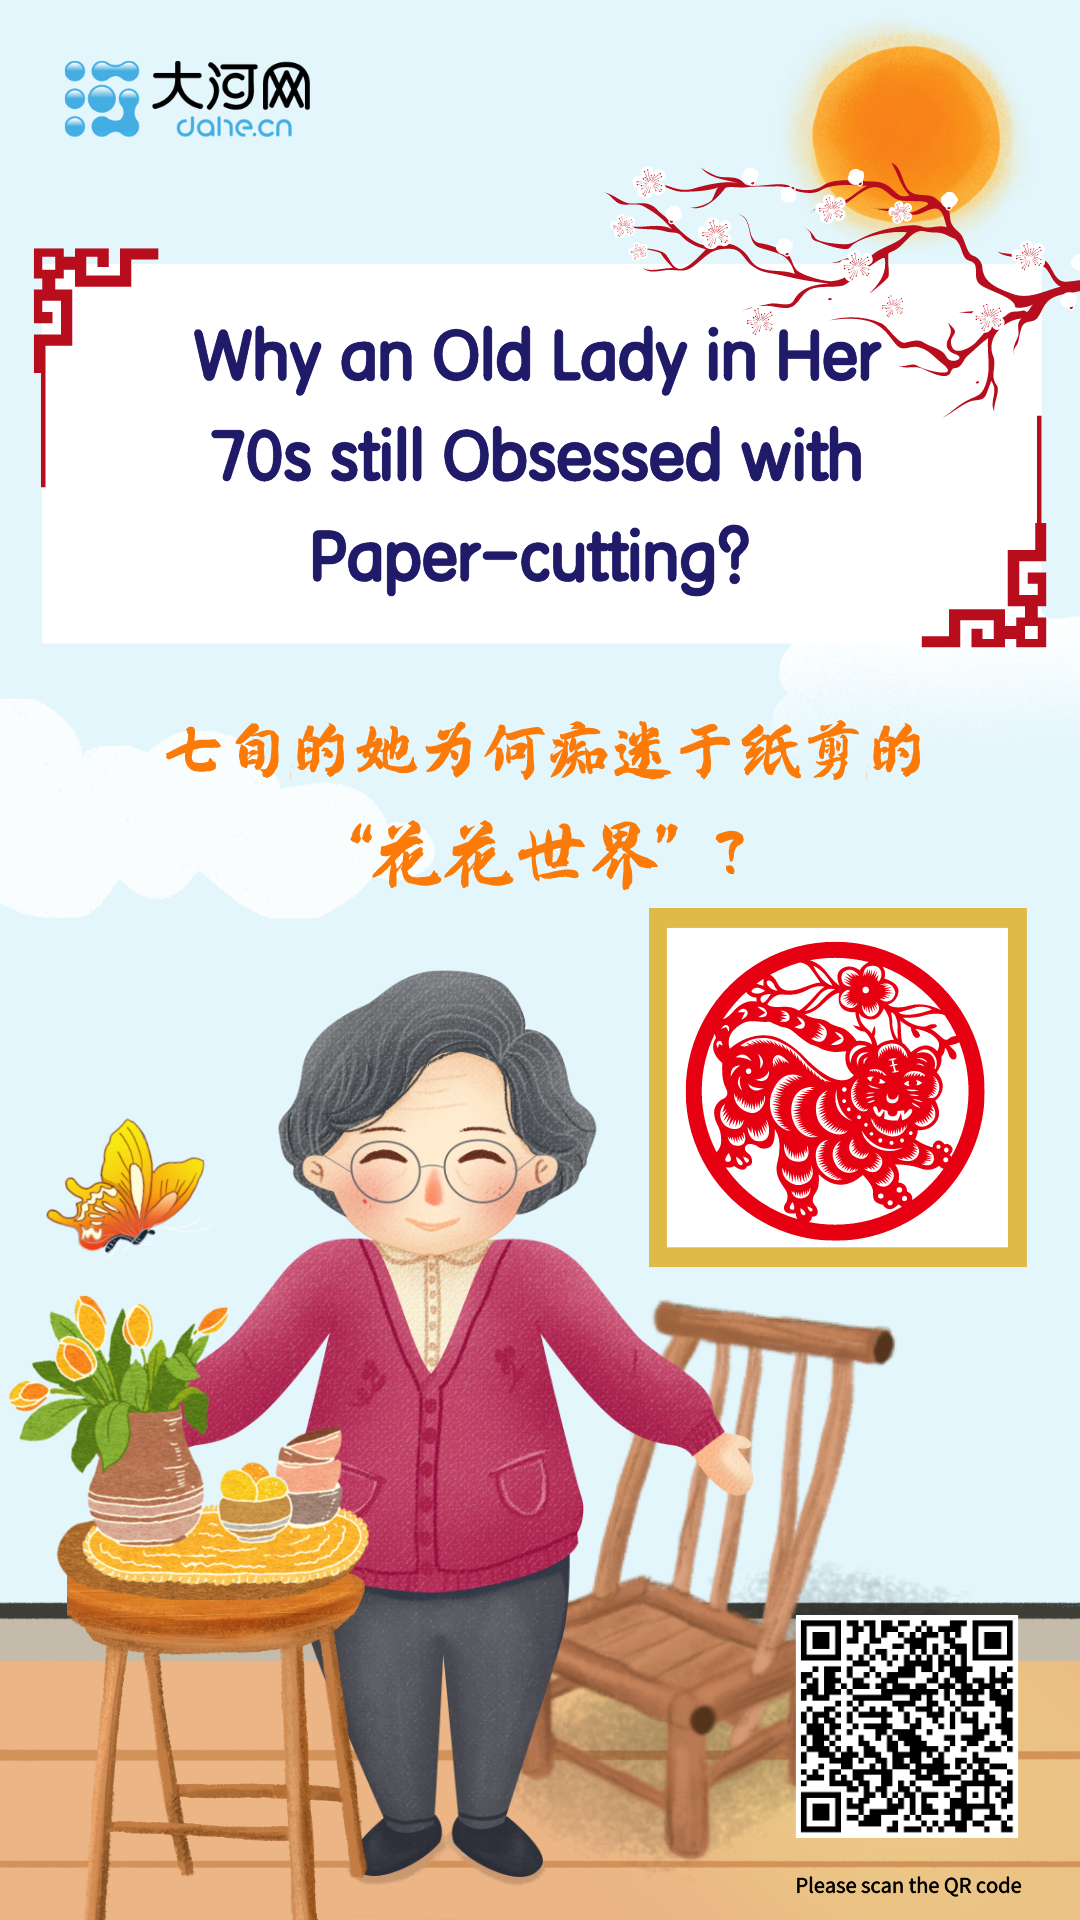 Why an Old Lady in Her 70s still Obsessed with Paper-cutting?